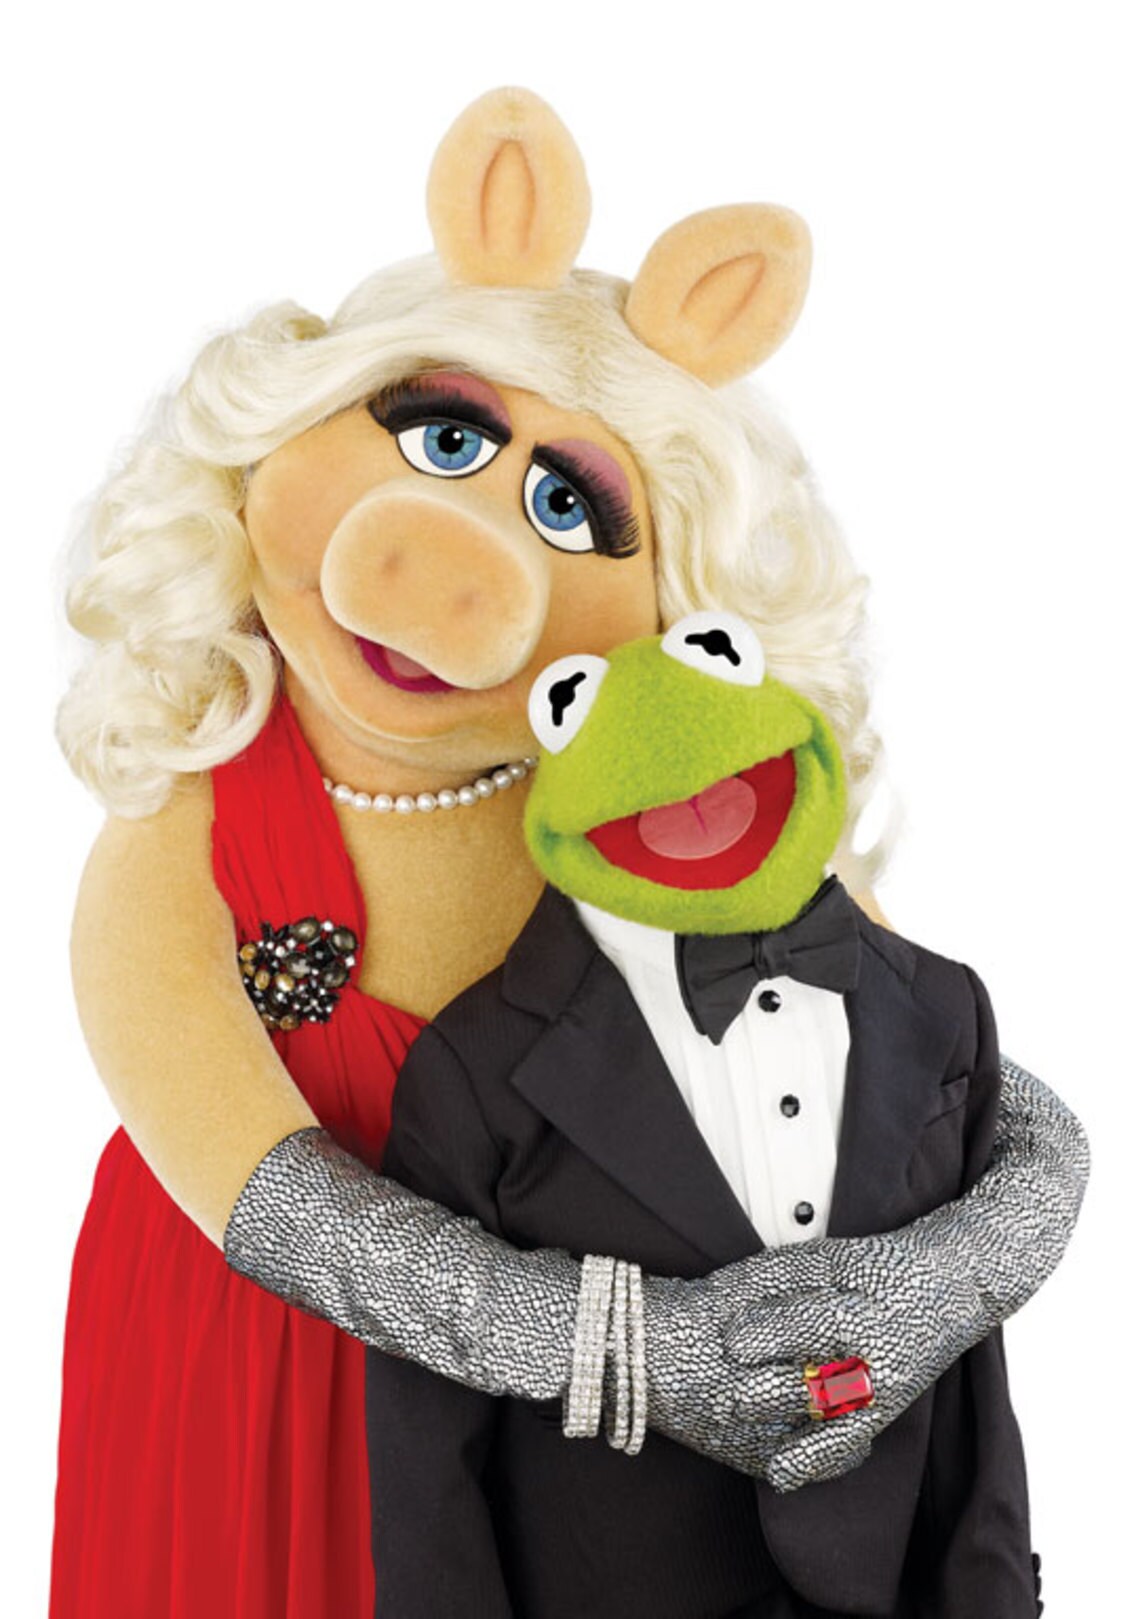 Kermit and Miss Piggy Gallery | Disney Muppets